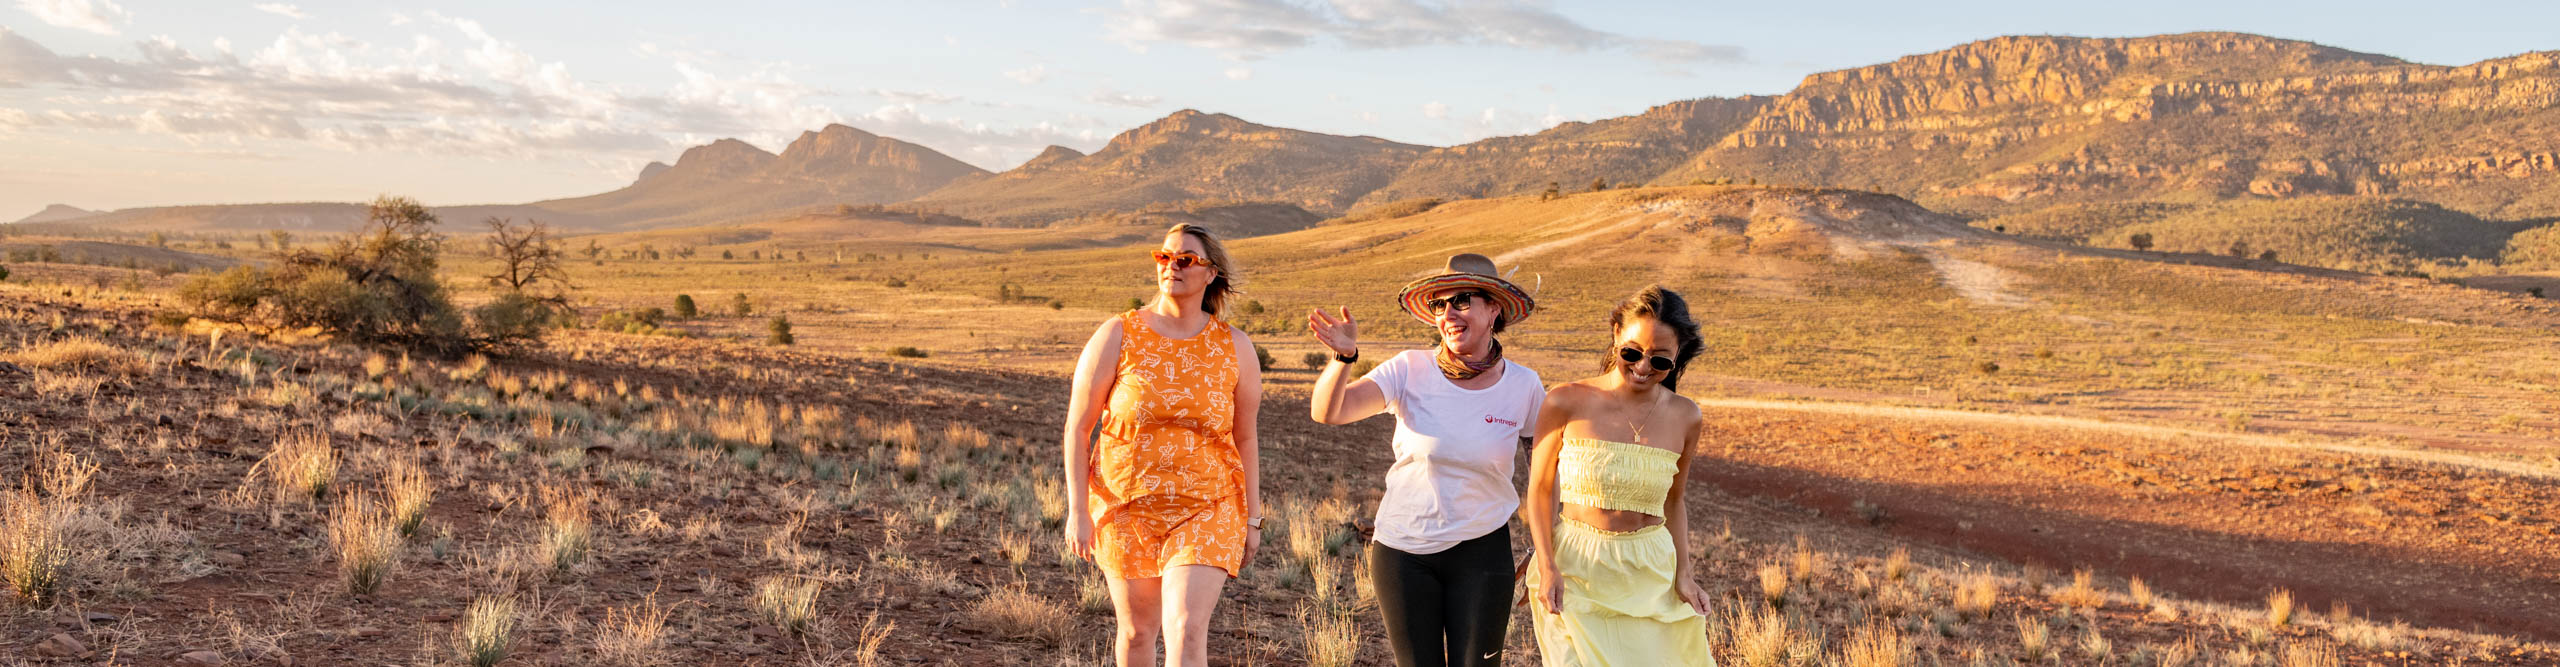 Group of women looking at the landscape at sunset in the Flinders Ranges, South Australia